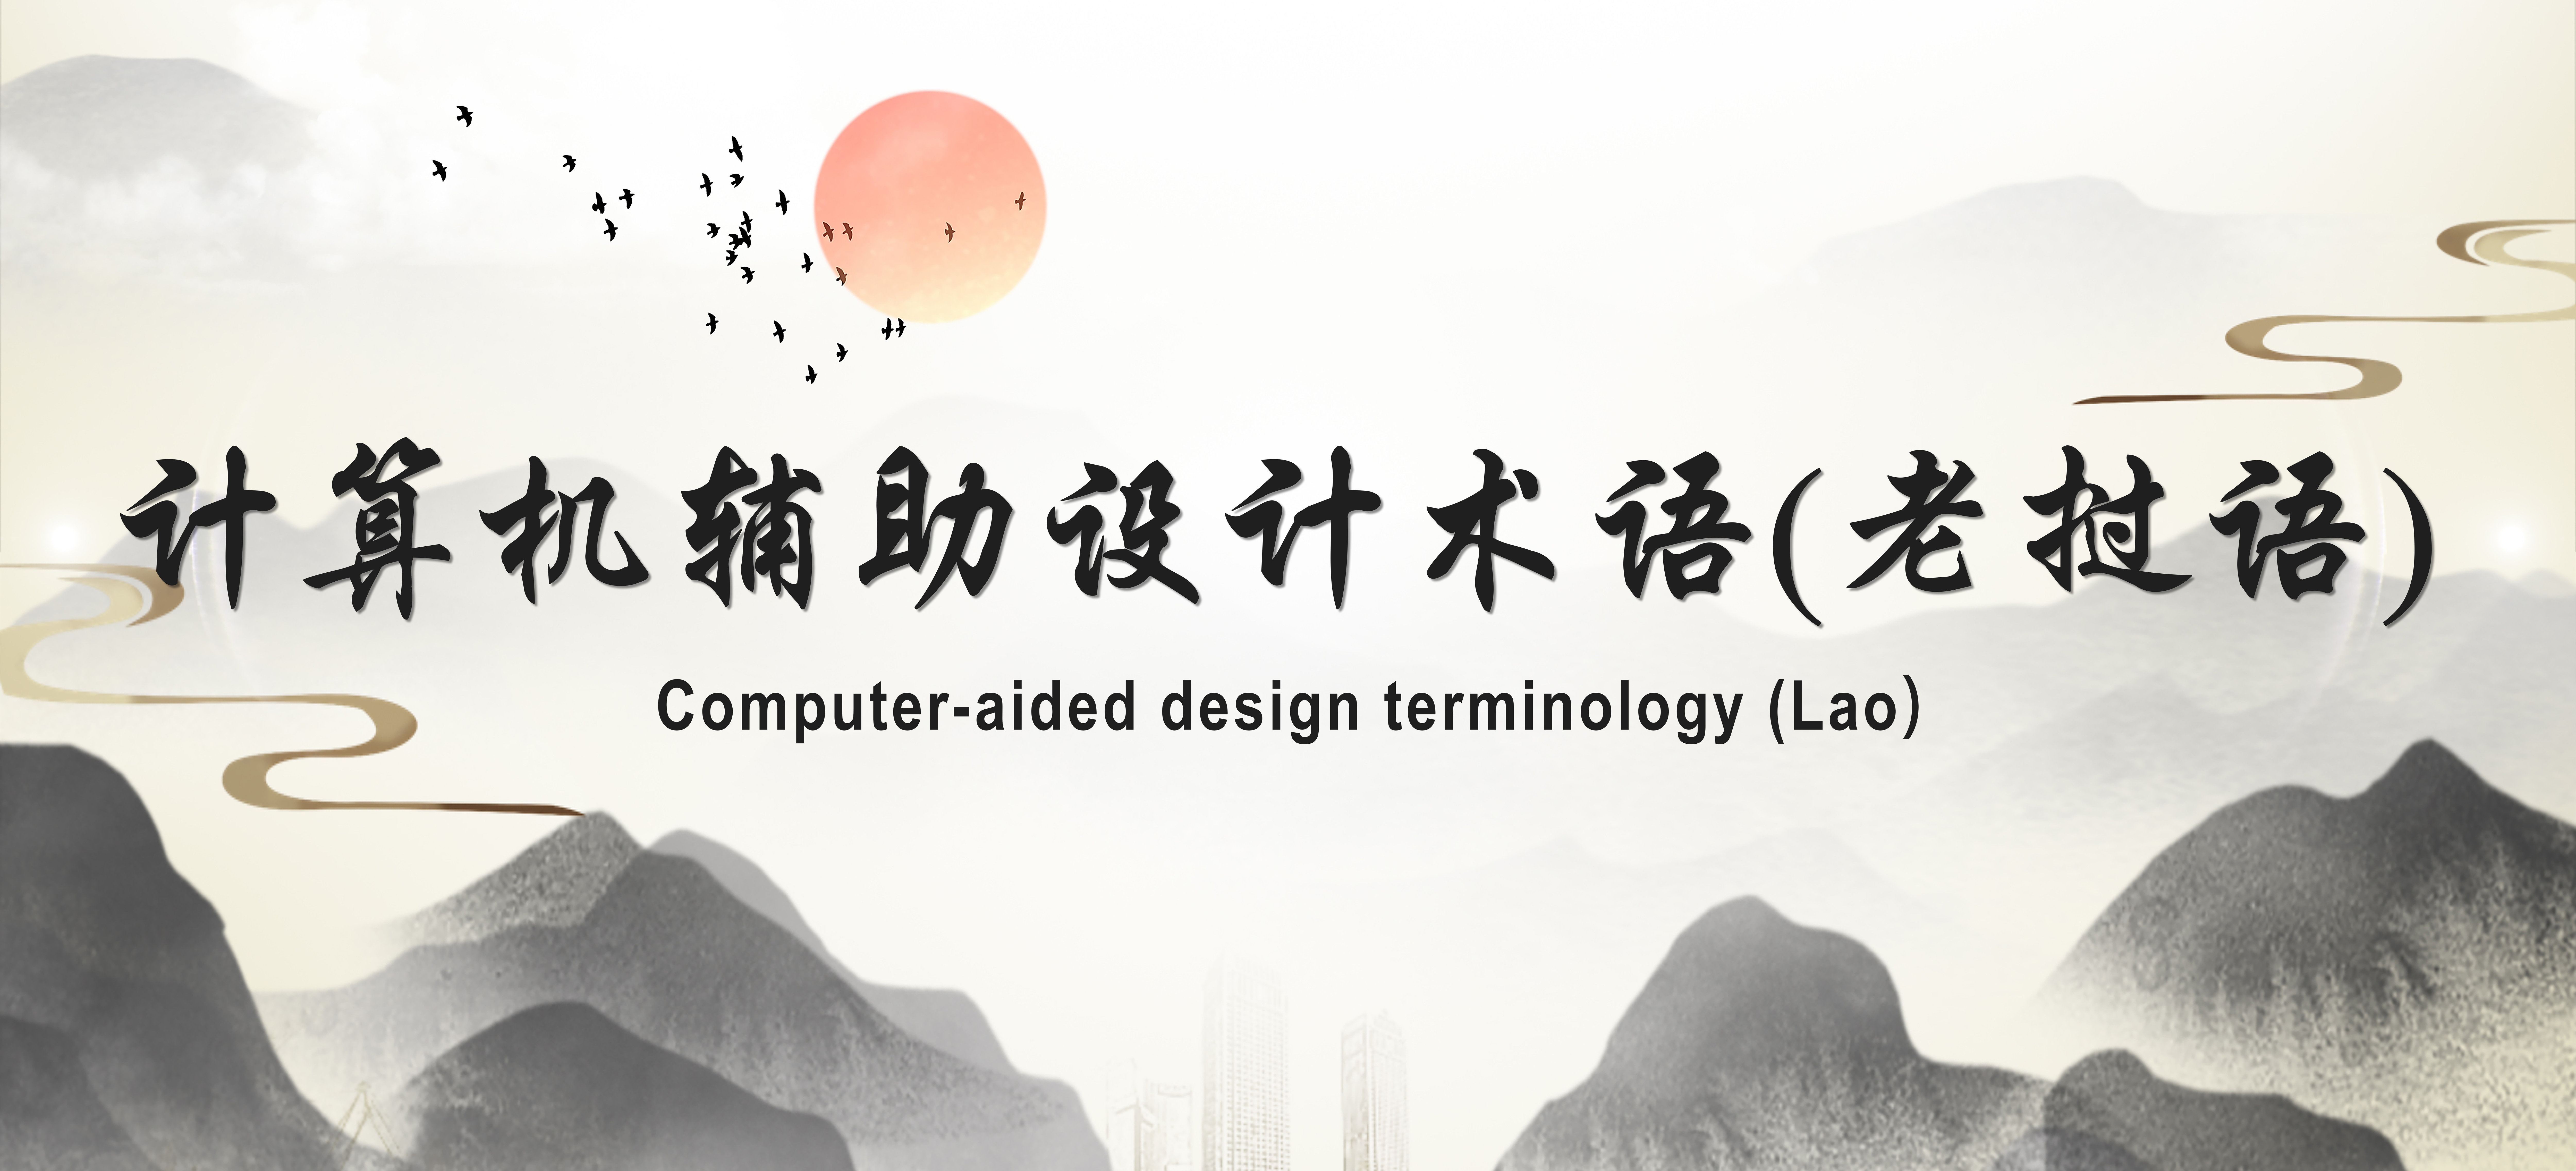 Computer-aided design terminology (Lao)